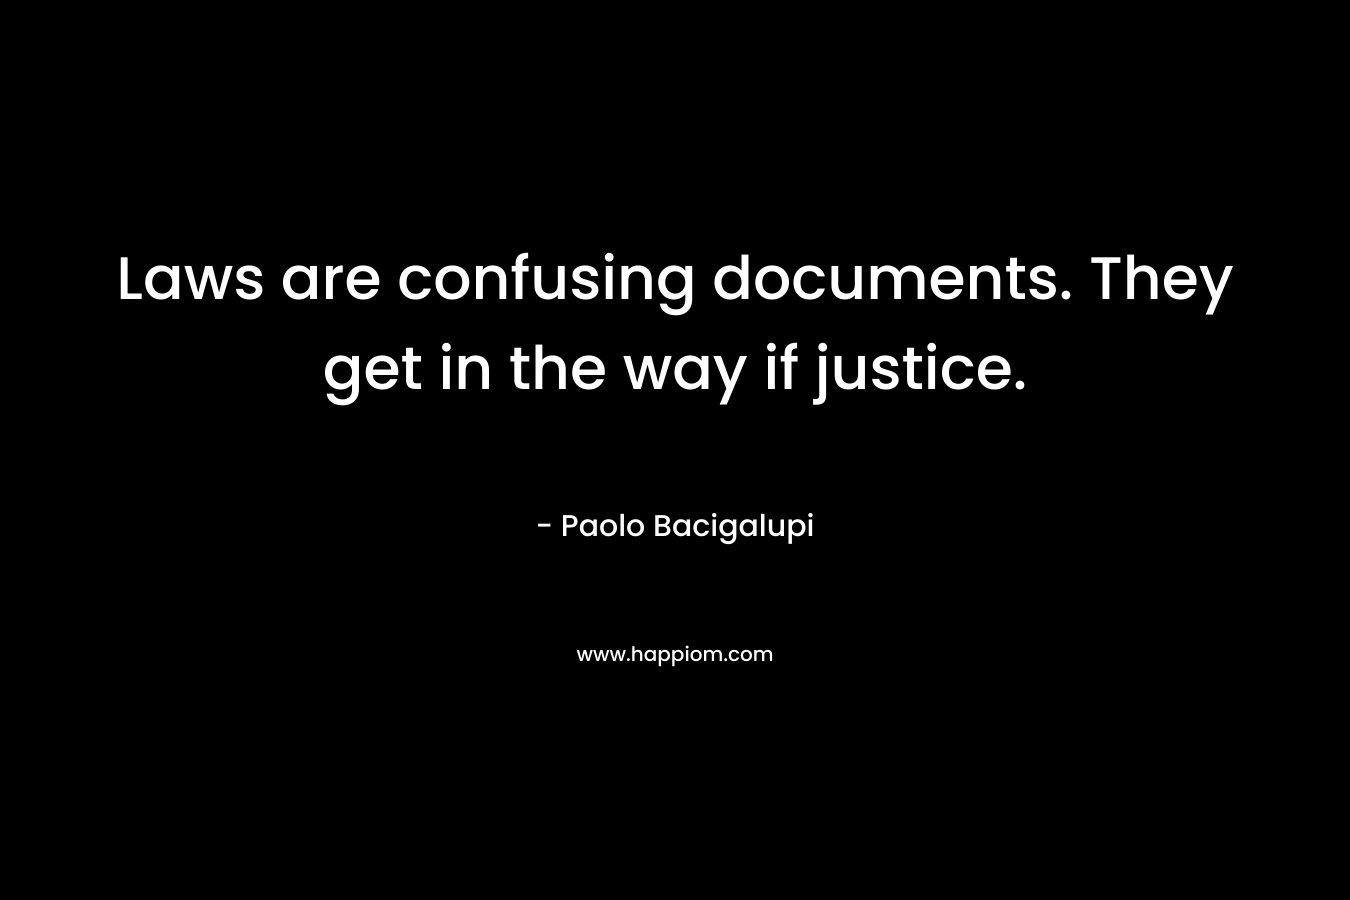 Laws are confusing documents. They get in the way if justice.